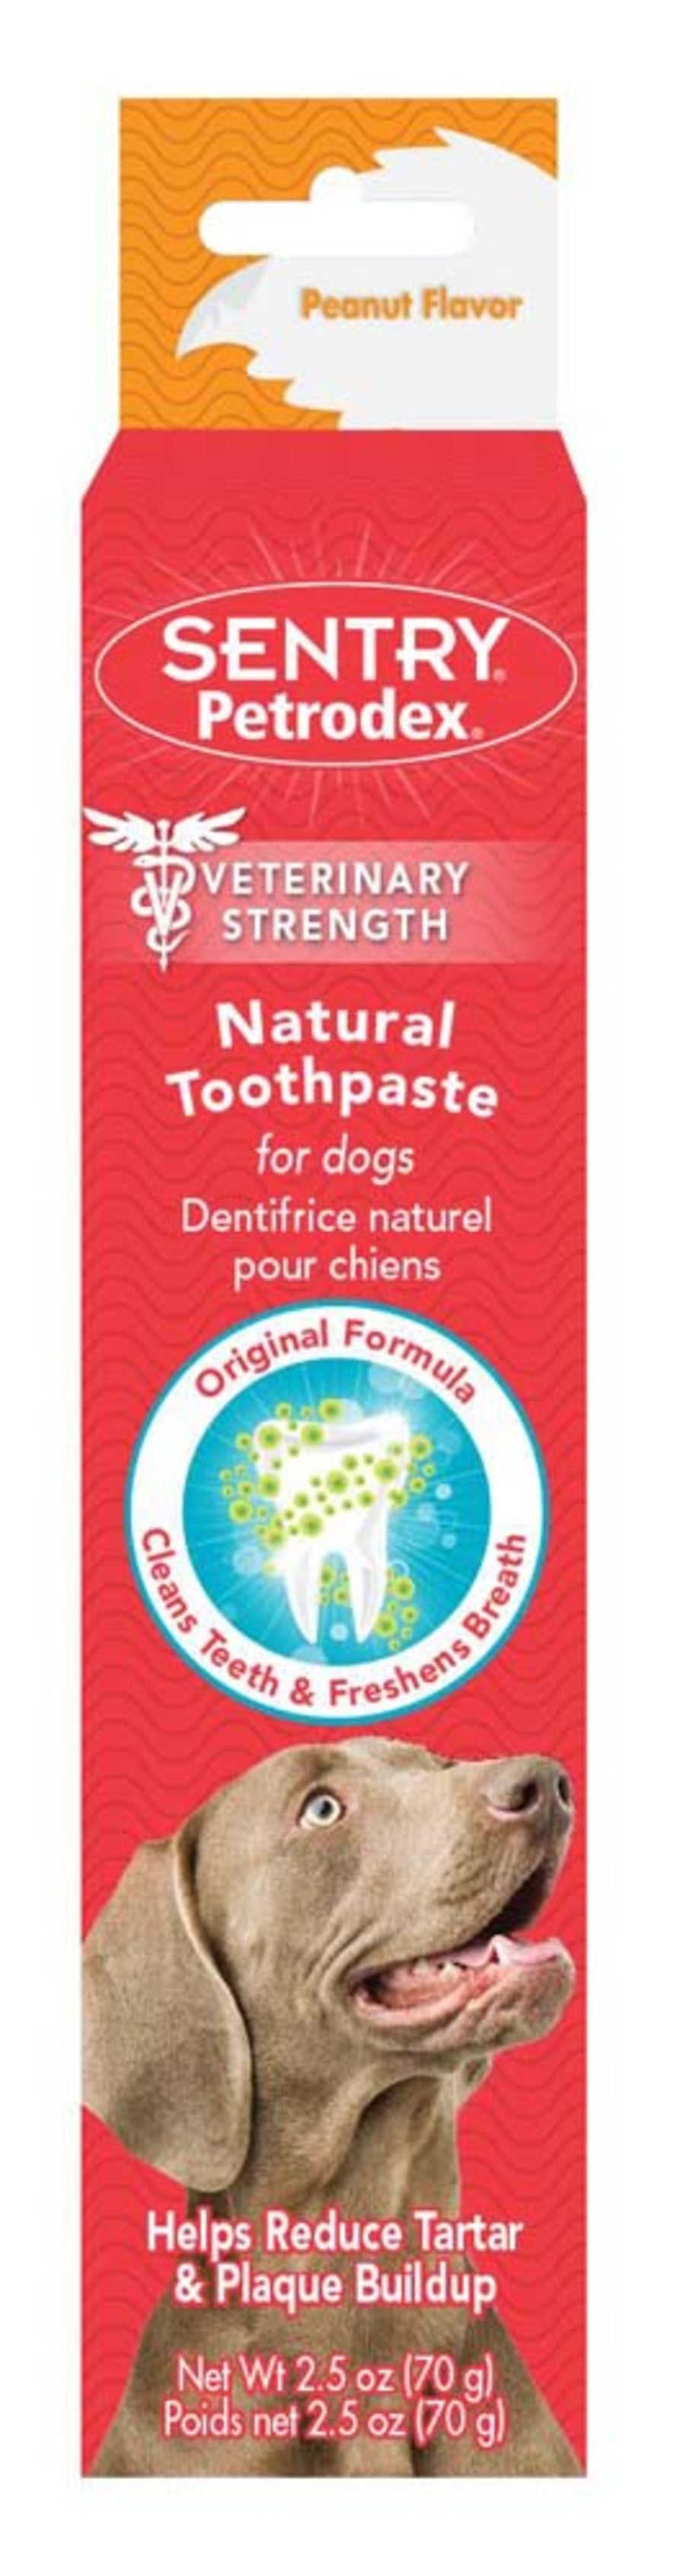 Petrodex Natural Peanut Toothpaste is formulated specifically for pets Uses all natural abrasives. Peanut flavor with chlorophyllin. Helps control plaque and fights bad breath.